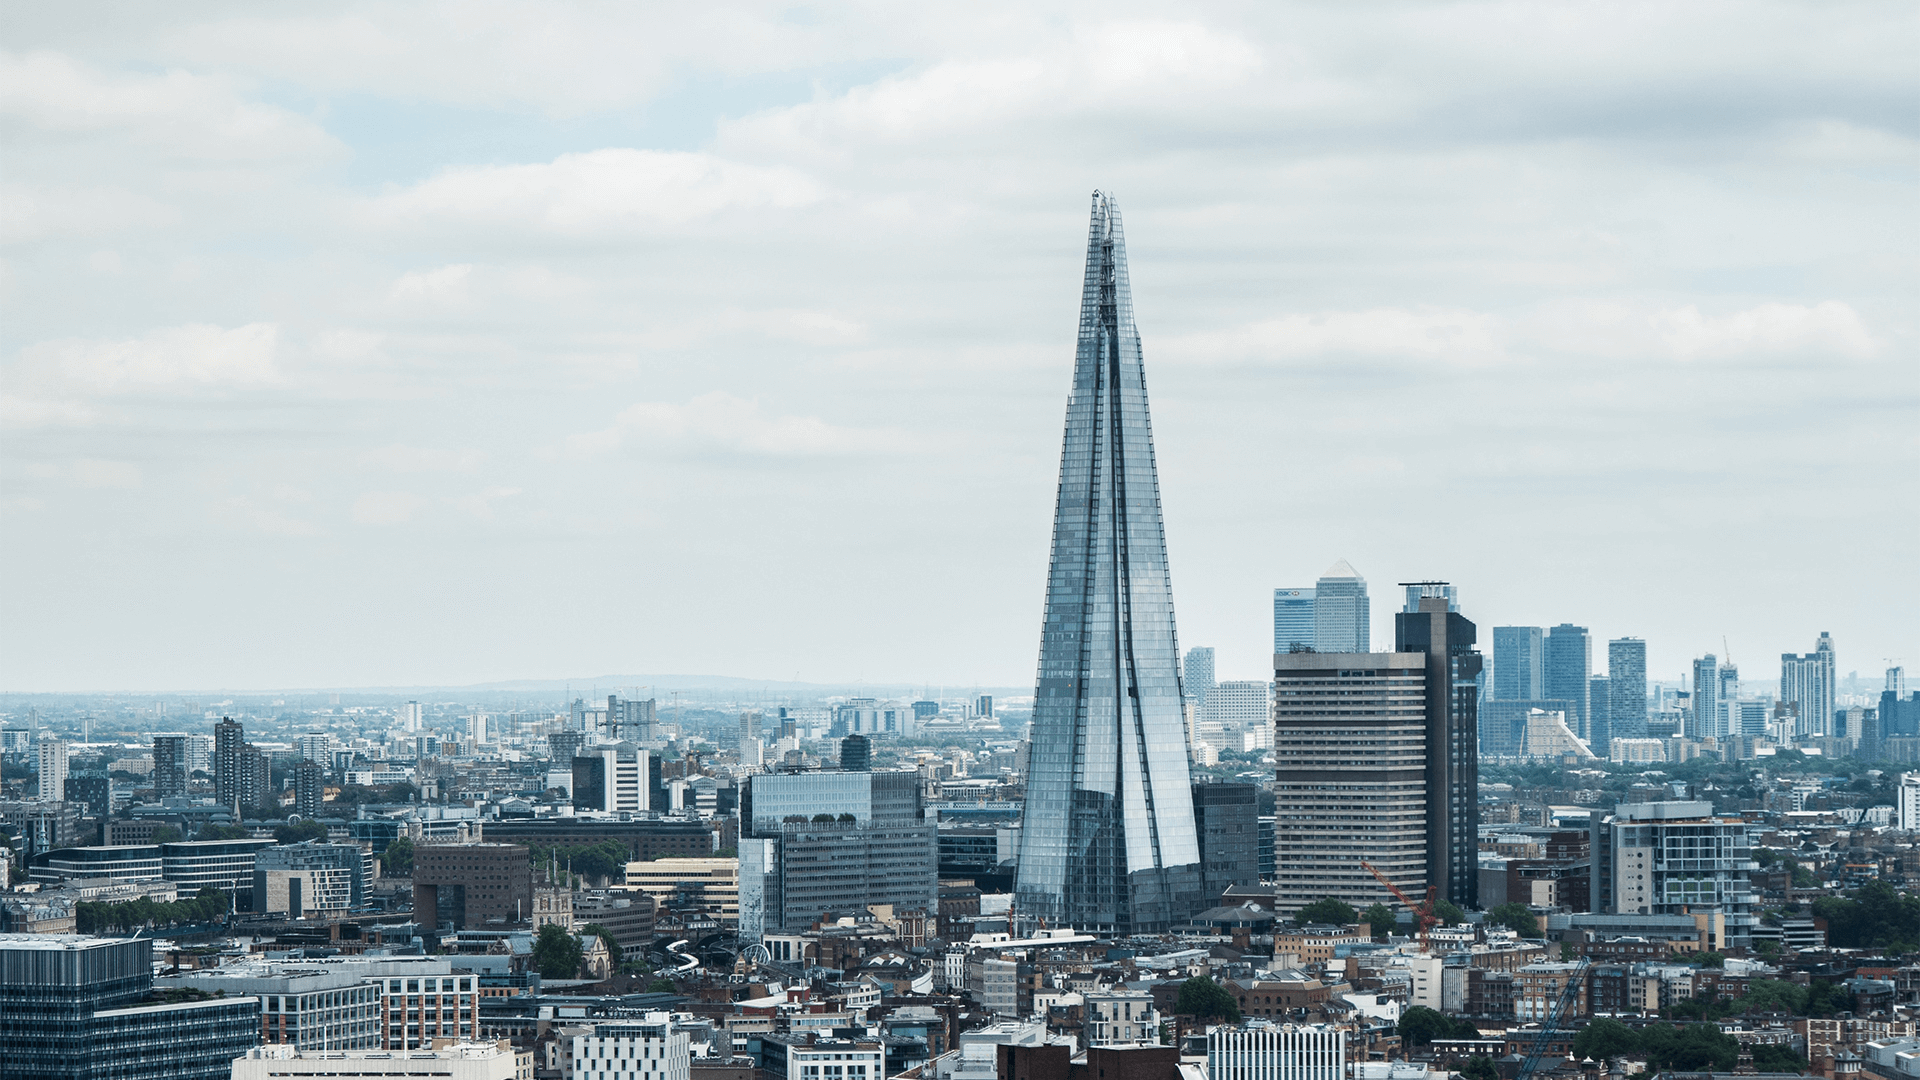 Background image of the Shard in London